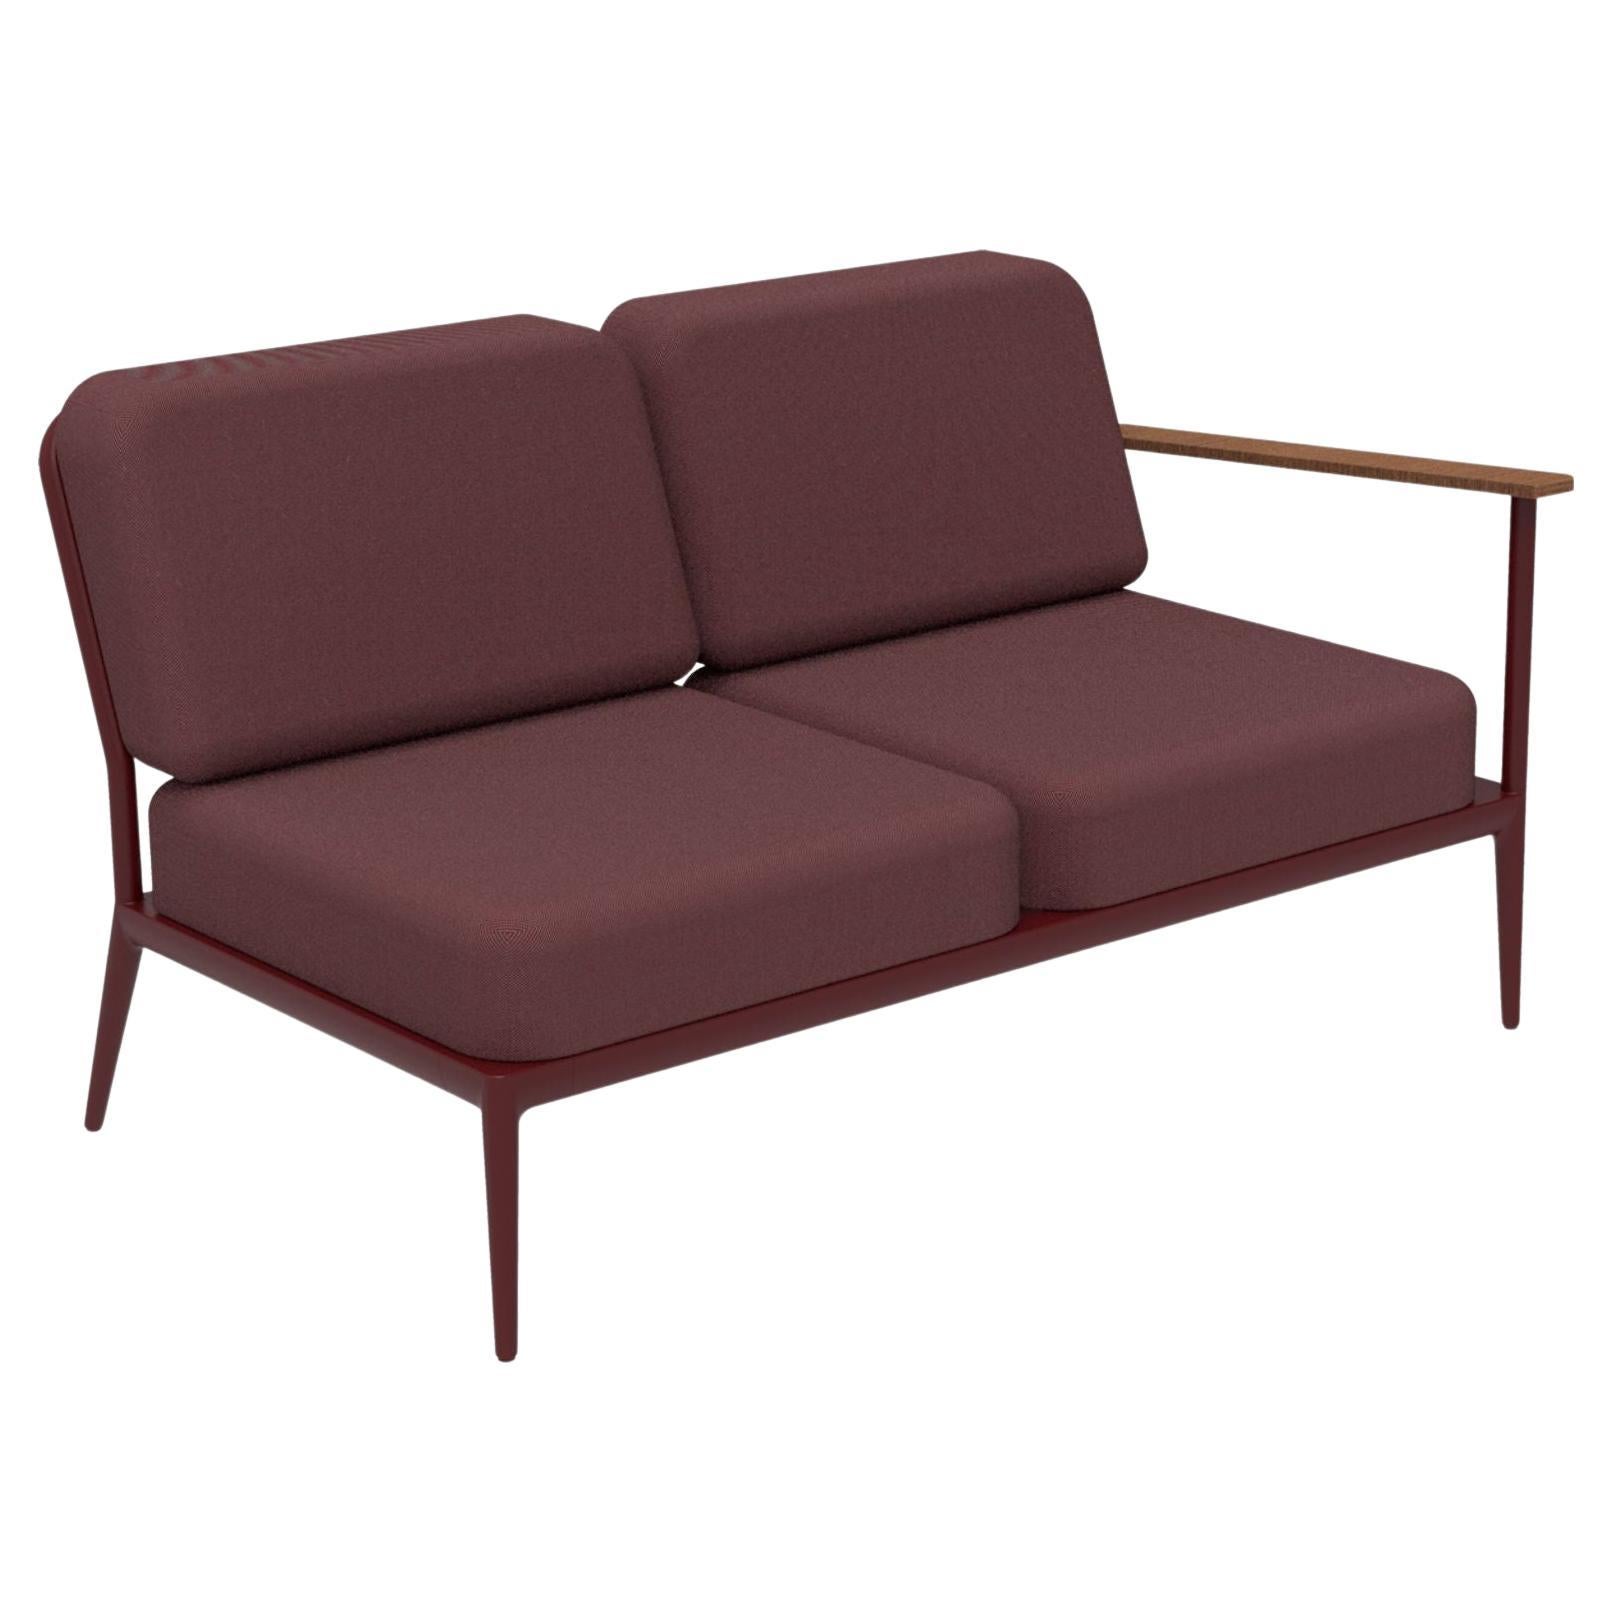 Nature Burgundy Double Left Modular Sofa by MOWEE For Sale